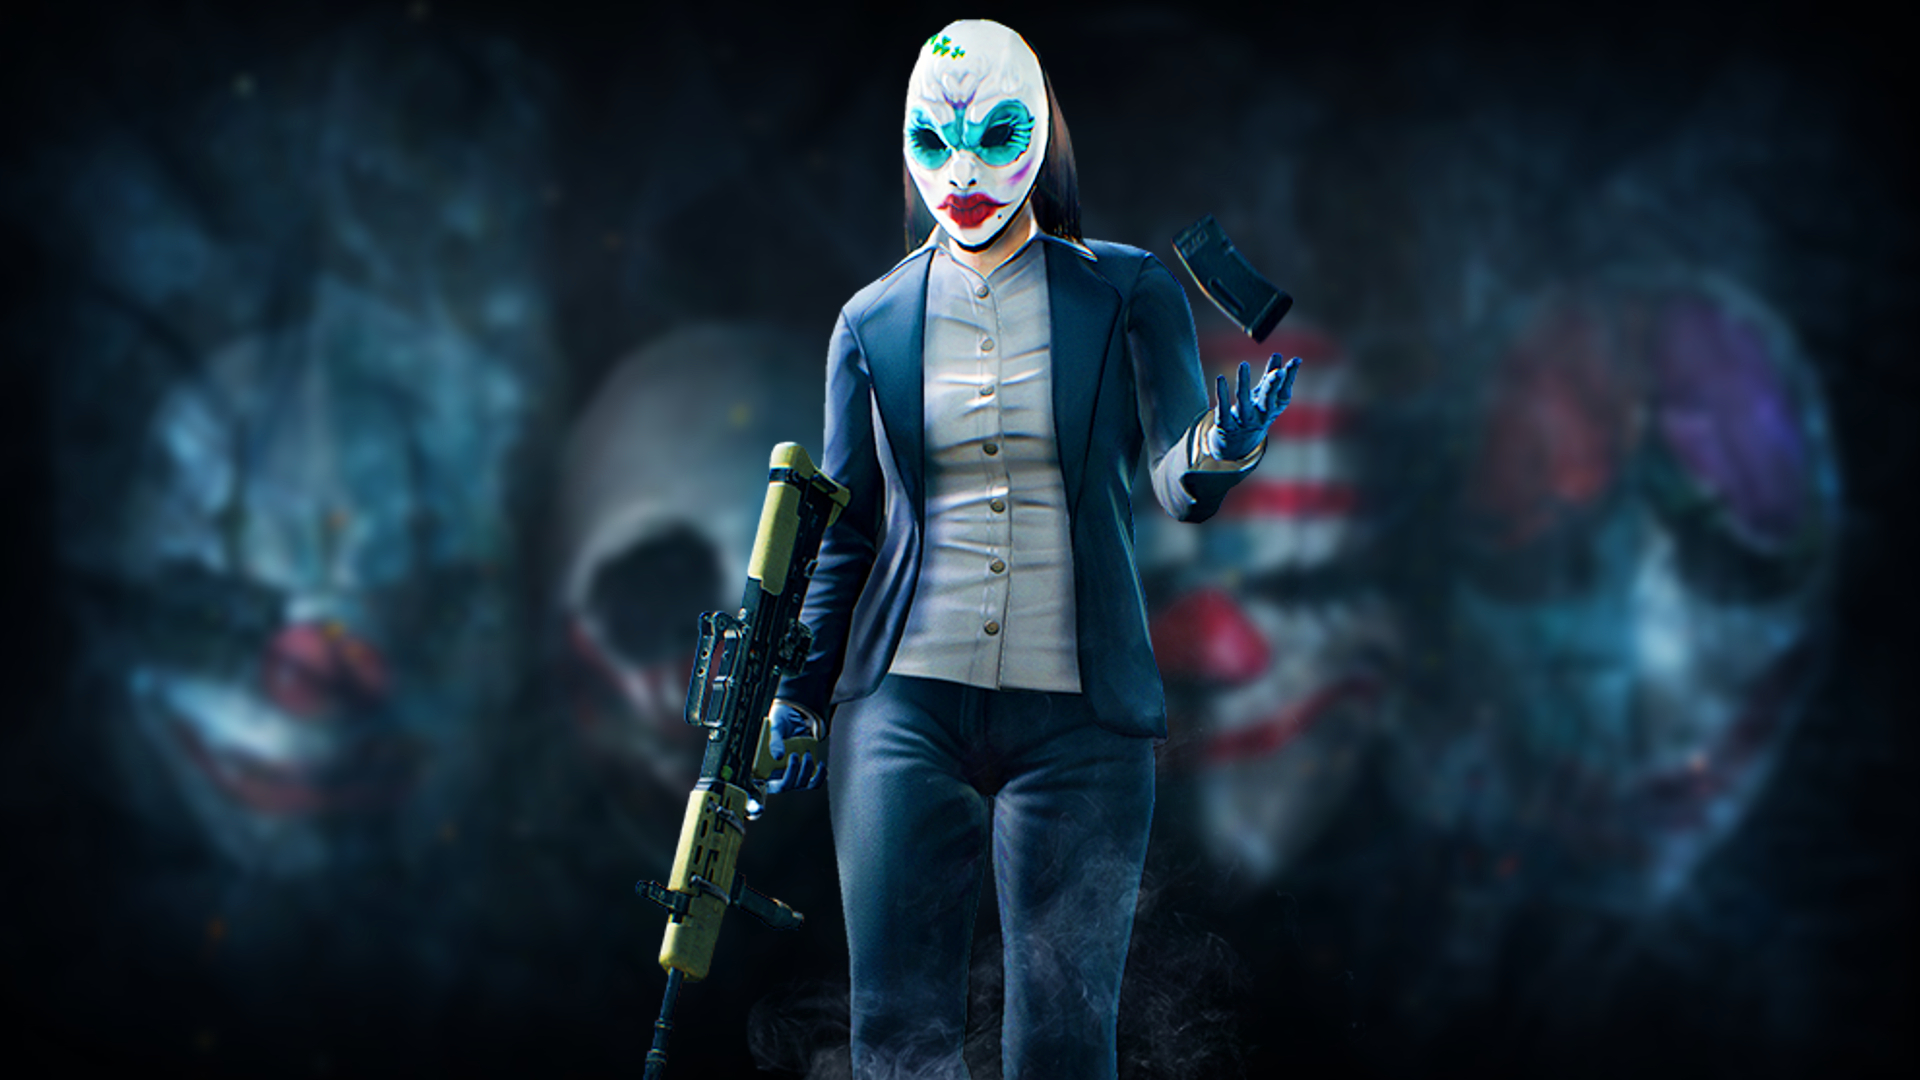 Payday 3's first patch is here, with lots of minor fixes